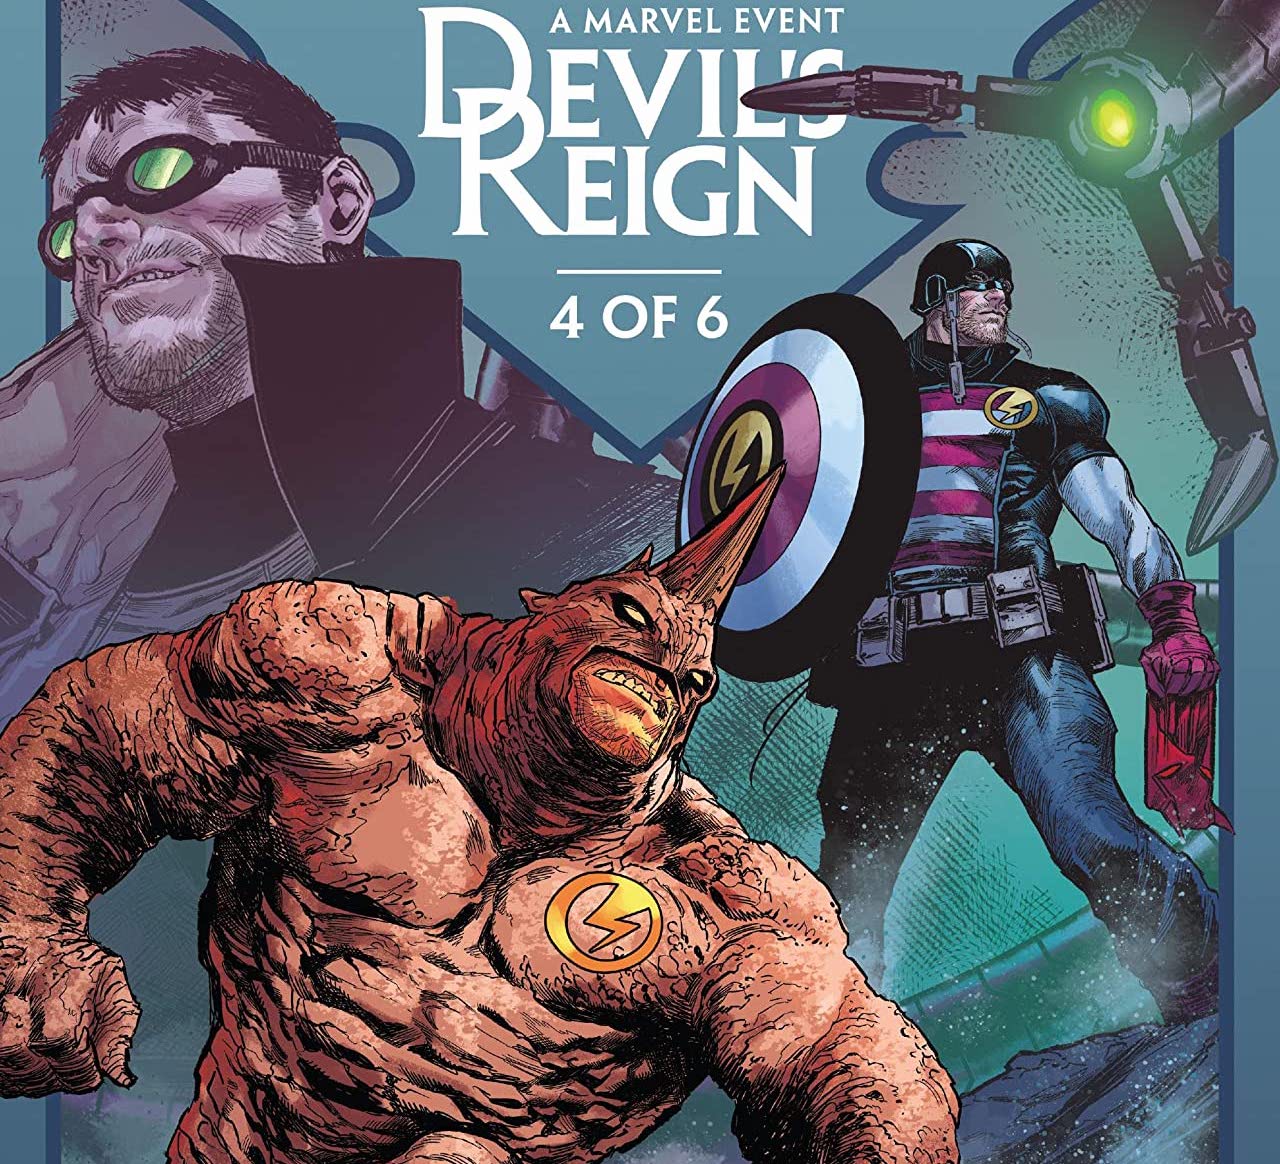 'Devil's Reign' #4 continues to feature great superhero character drama